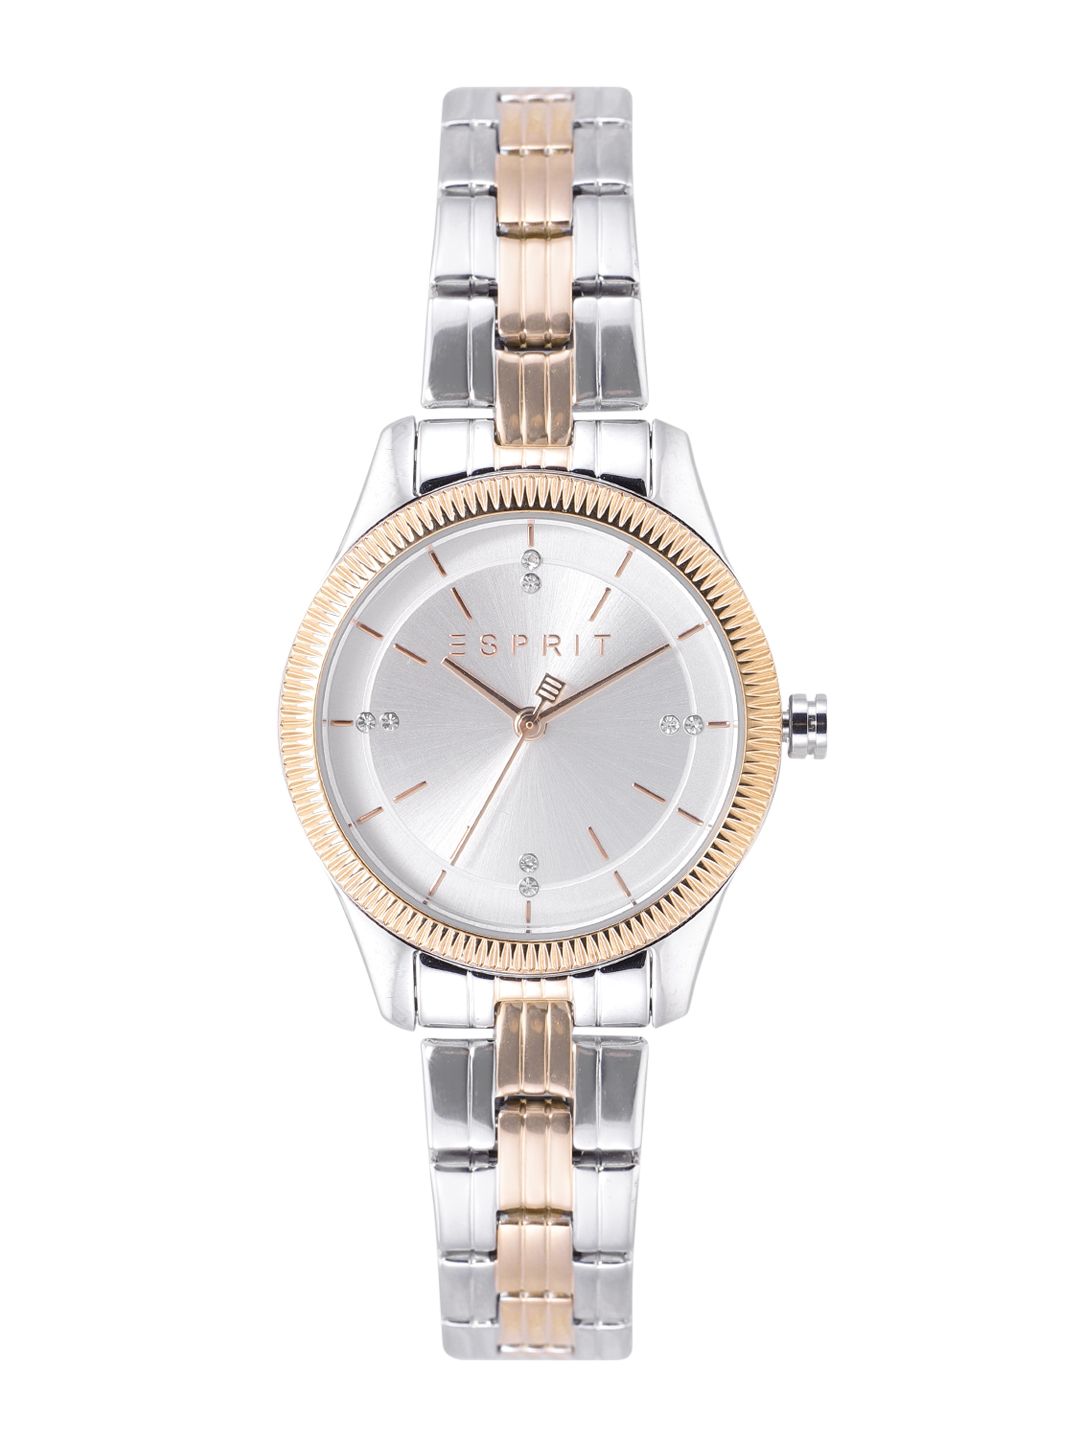 ESPRIT Women Silver-Toned Dial & Bracelet Style Straps Analogue Watch ES1L215M0115 Price in India